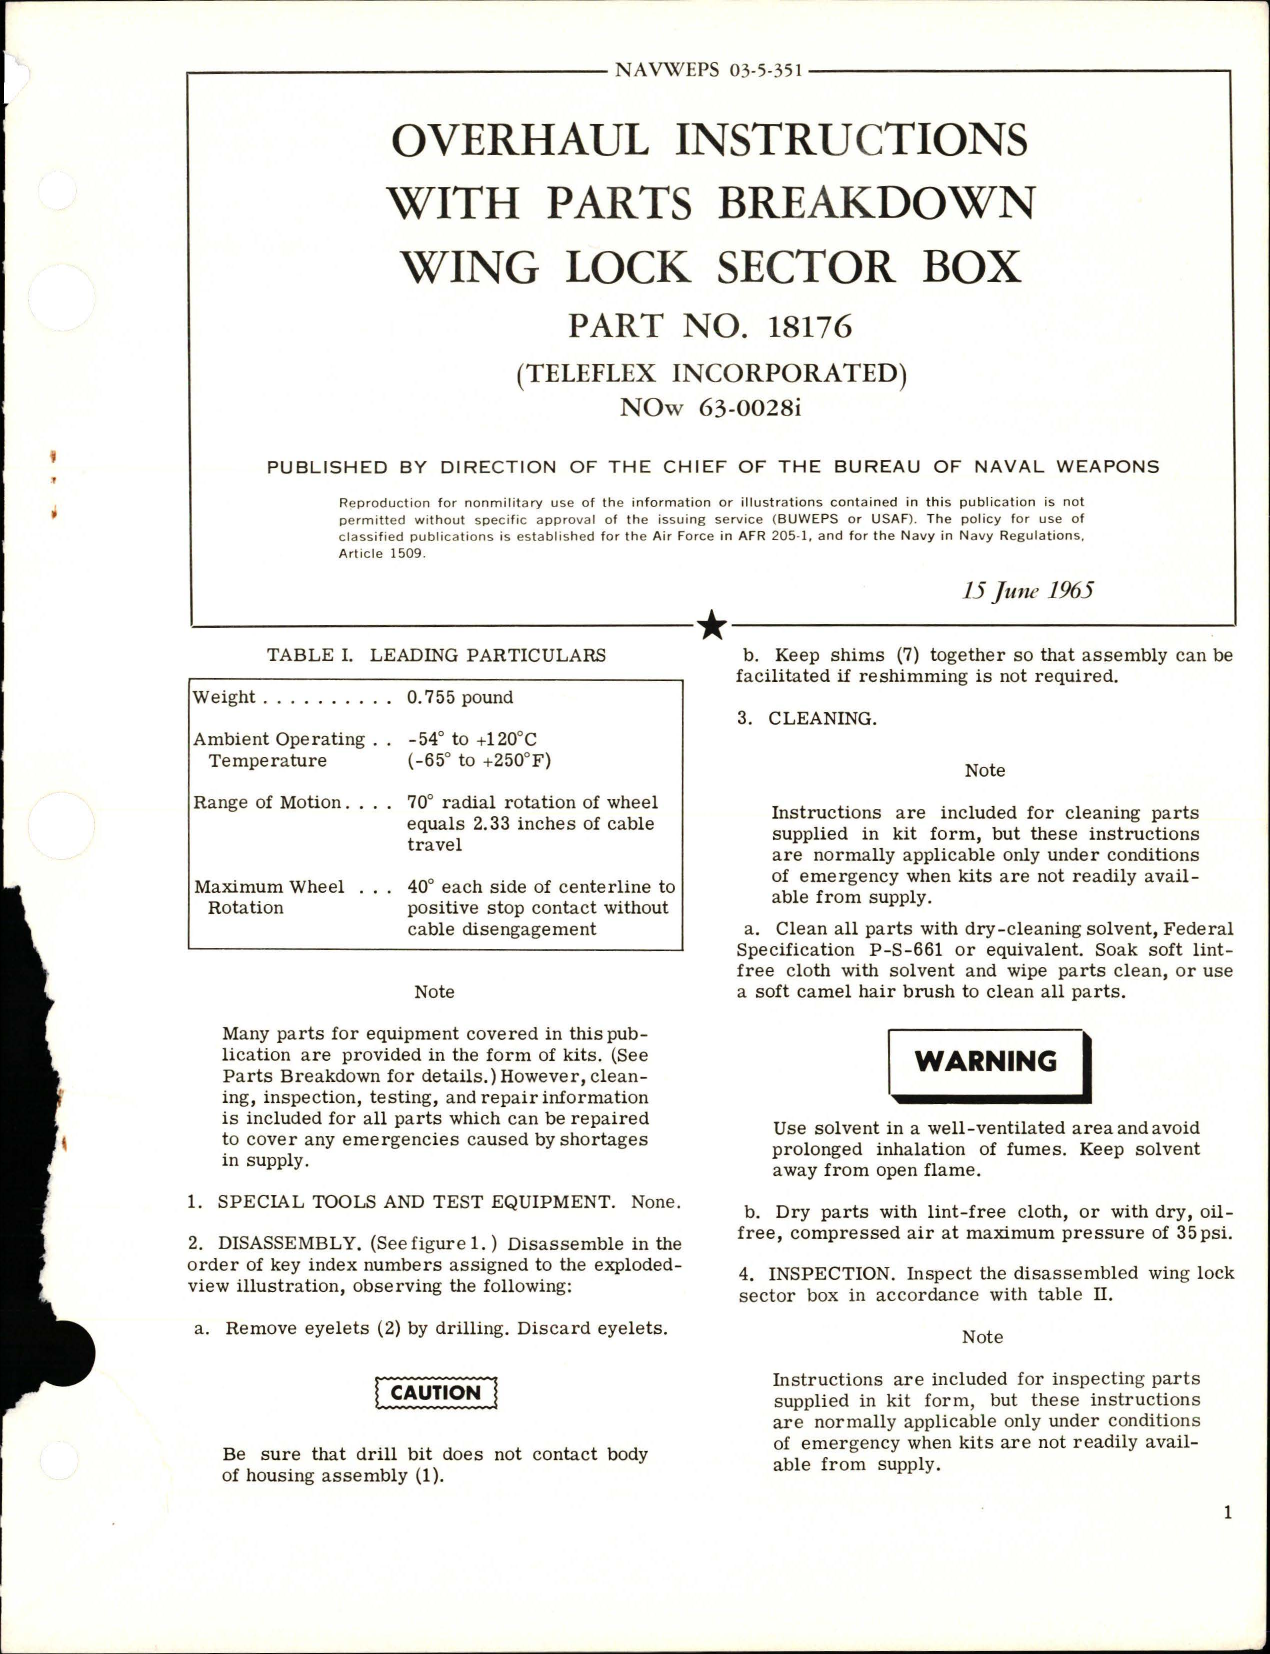 Sample page 1 from AirCorps Library document: Overhaul Instructions with Parts Breakdown for Wing Lock Sector Box - Part 18176